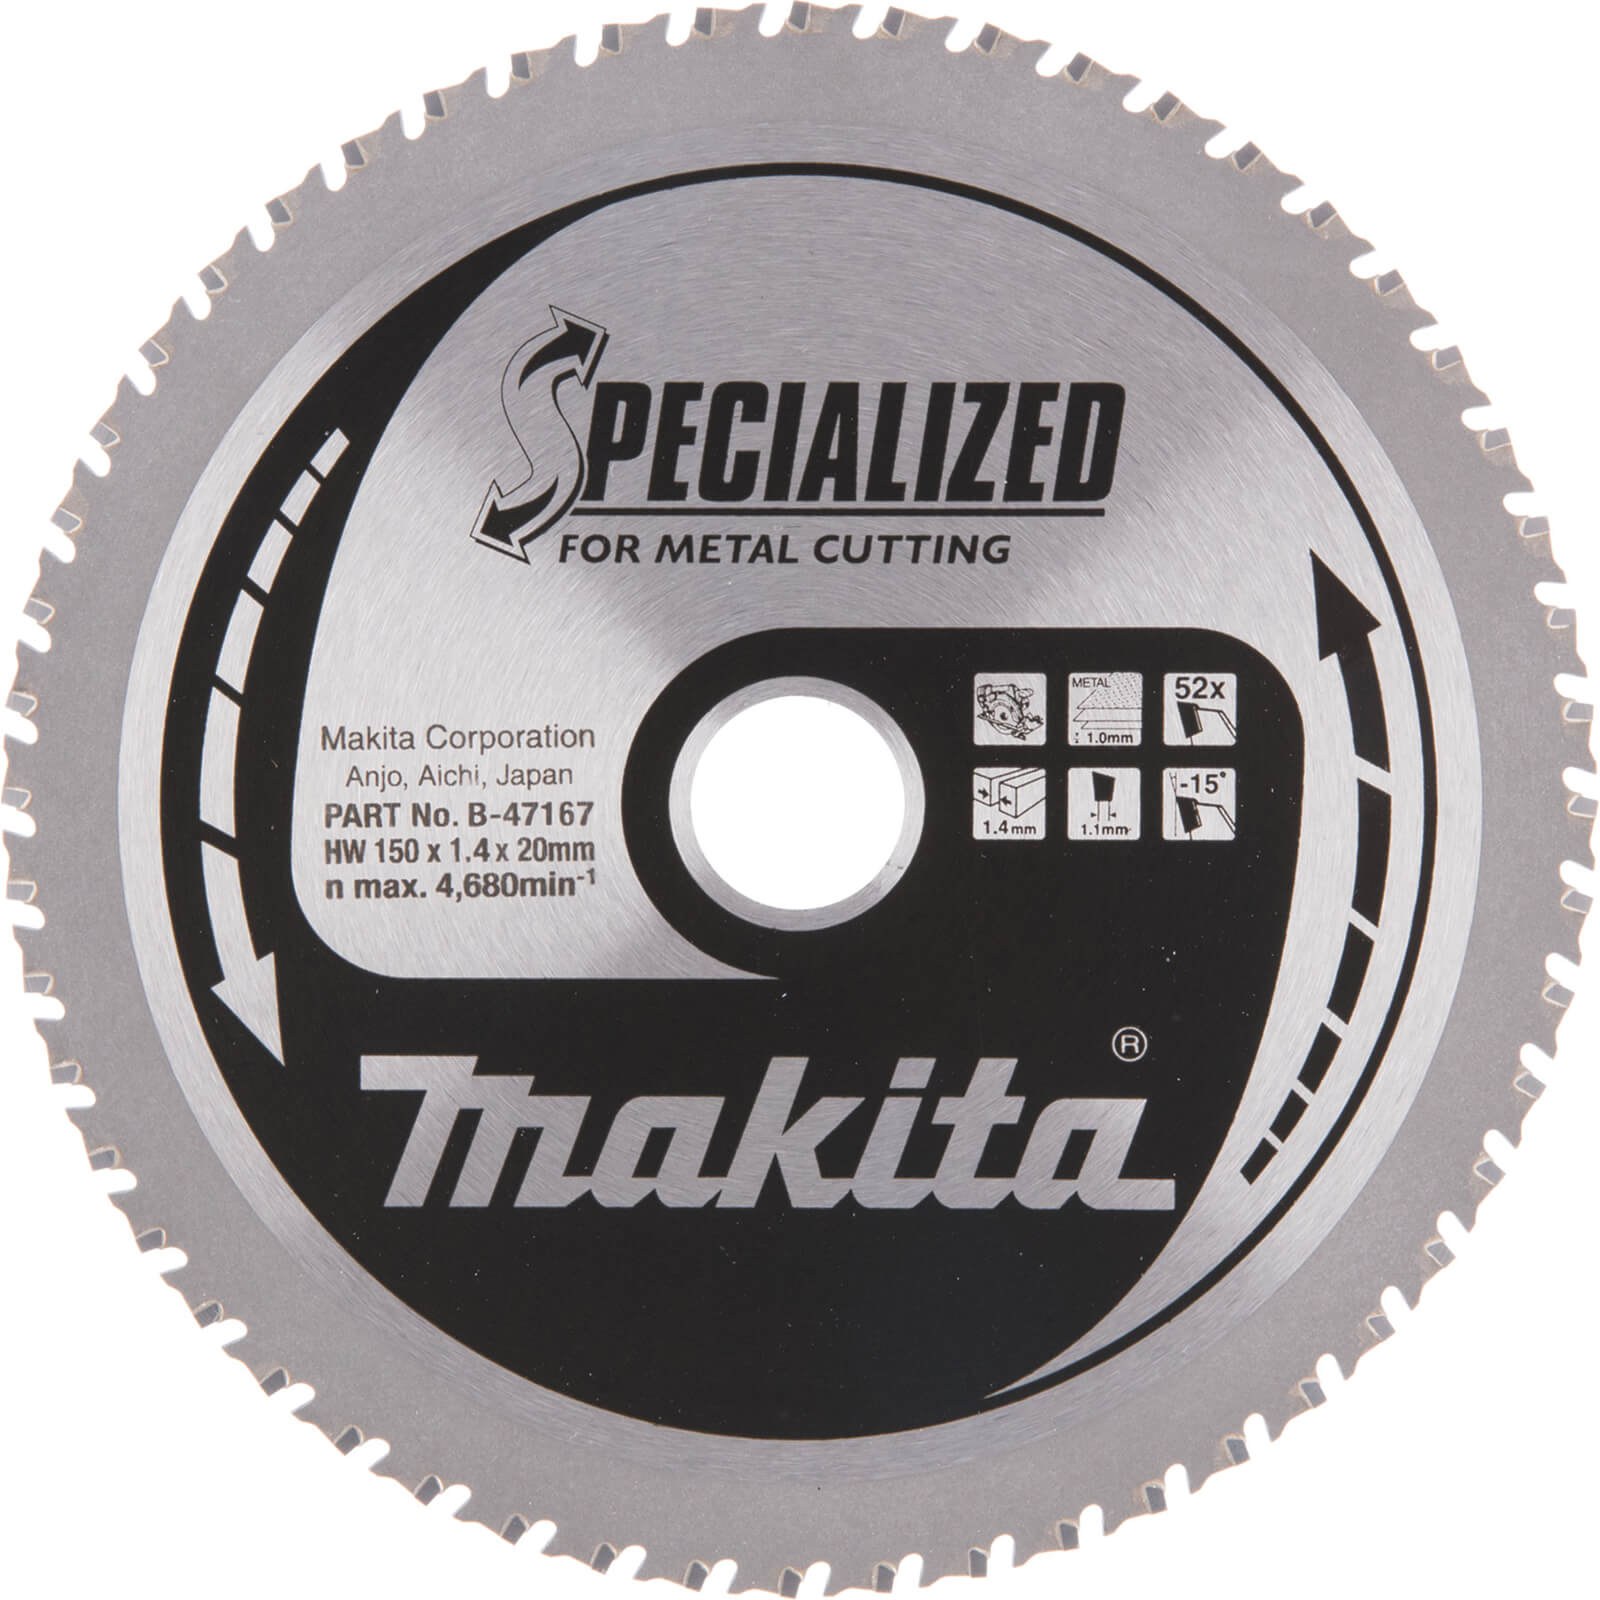 Photos - Power Tool Accessory Makita SPECIALIZED Cordless Sheet Metal Cutting Saw Blade 150mm 52T 20mm B 